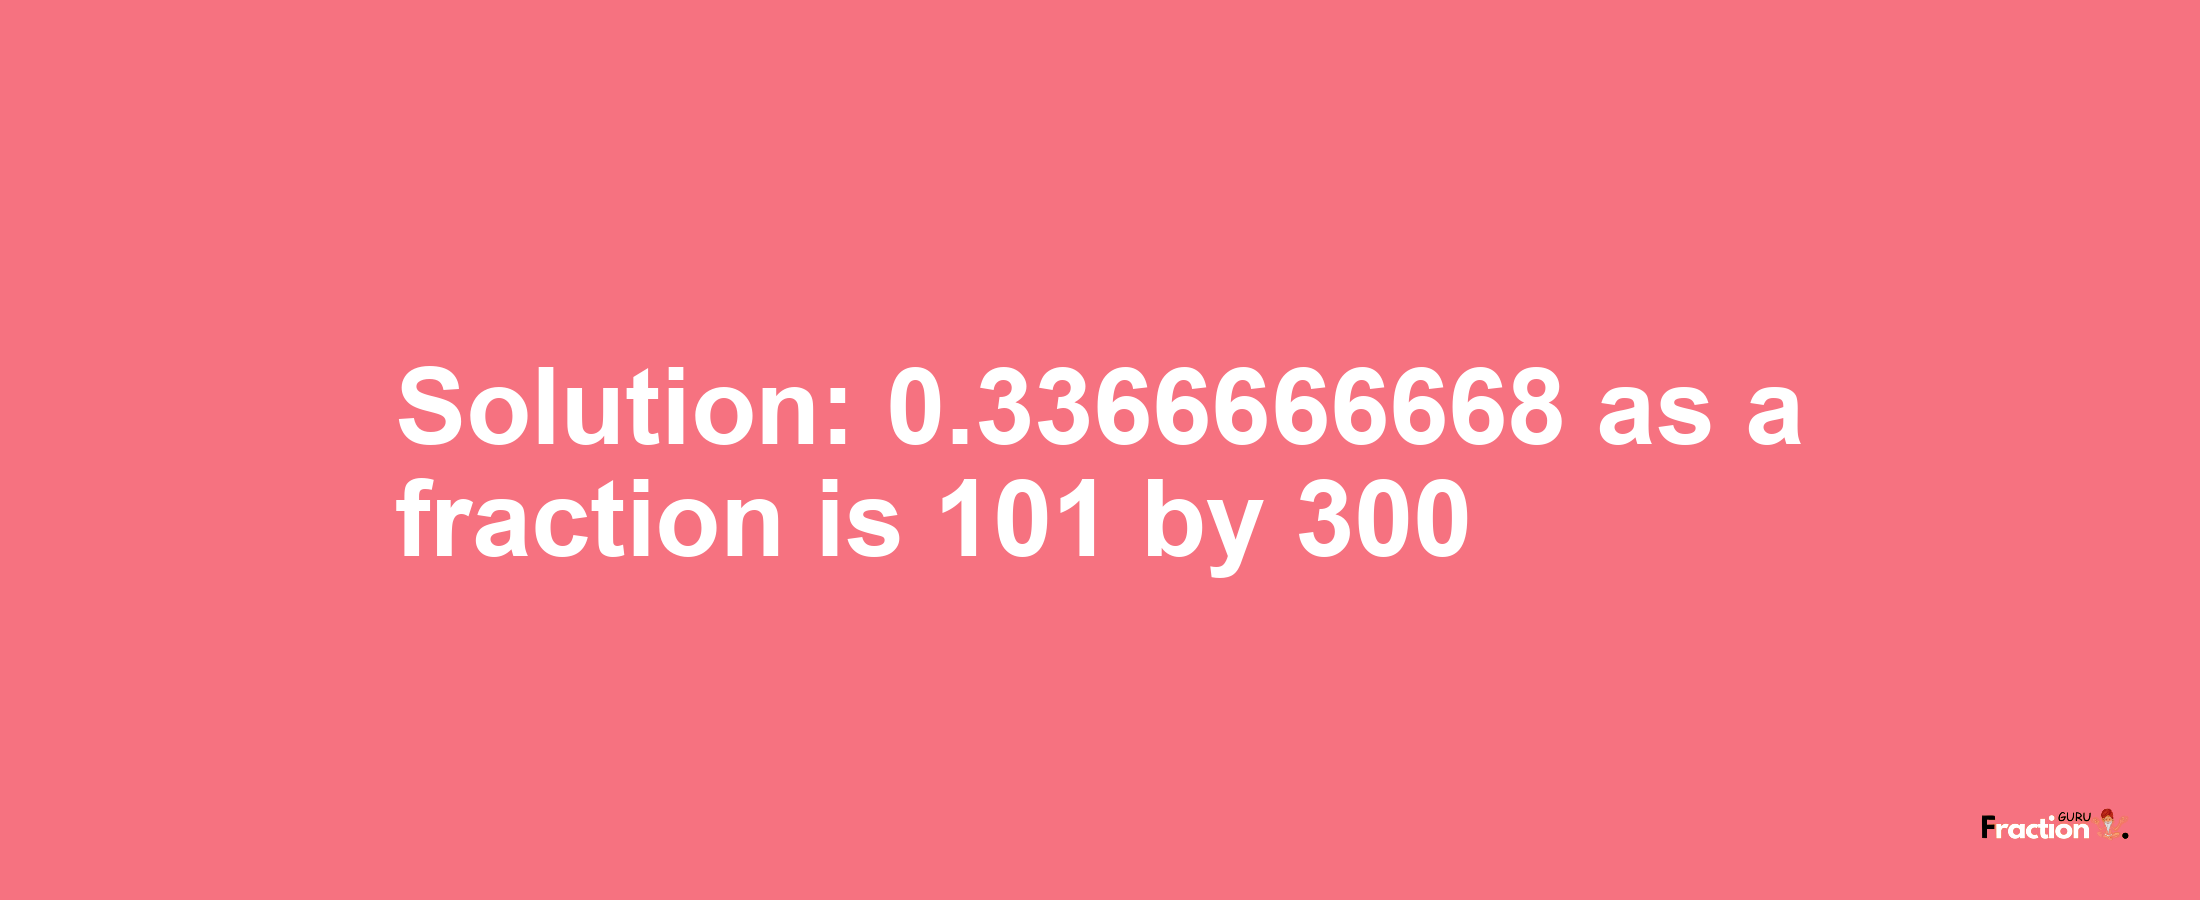 Solution:0.3366666668 as a fraction is 101/300